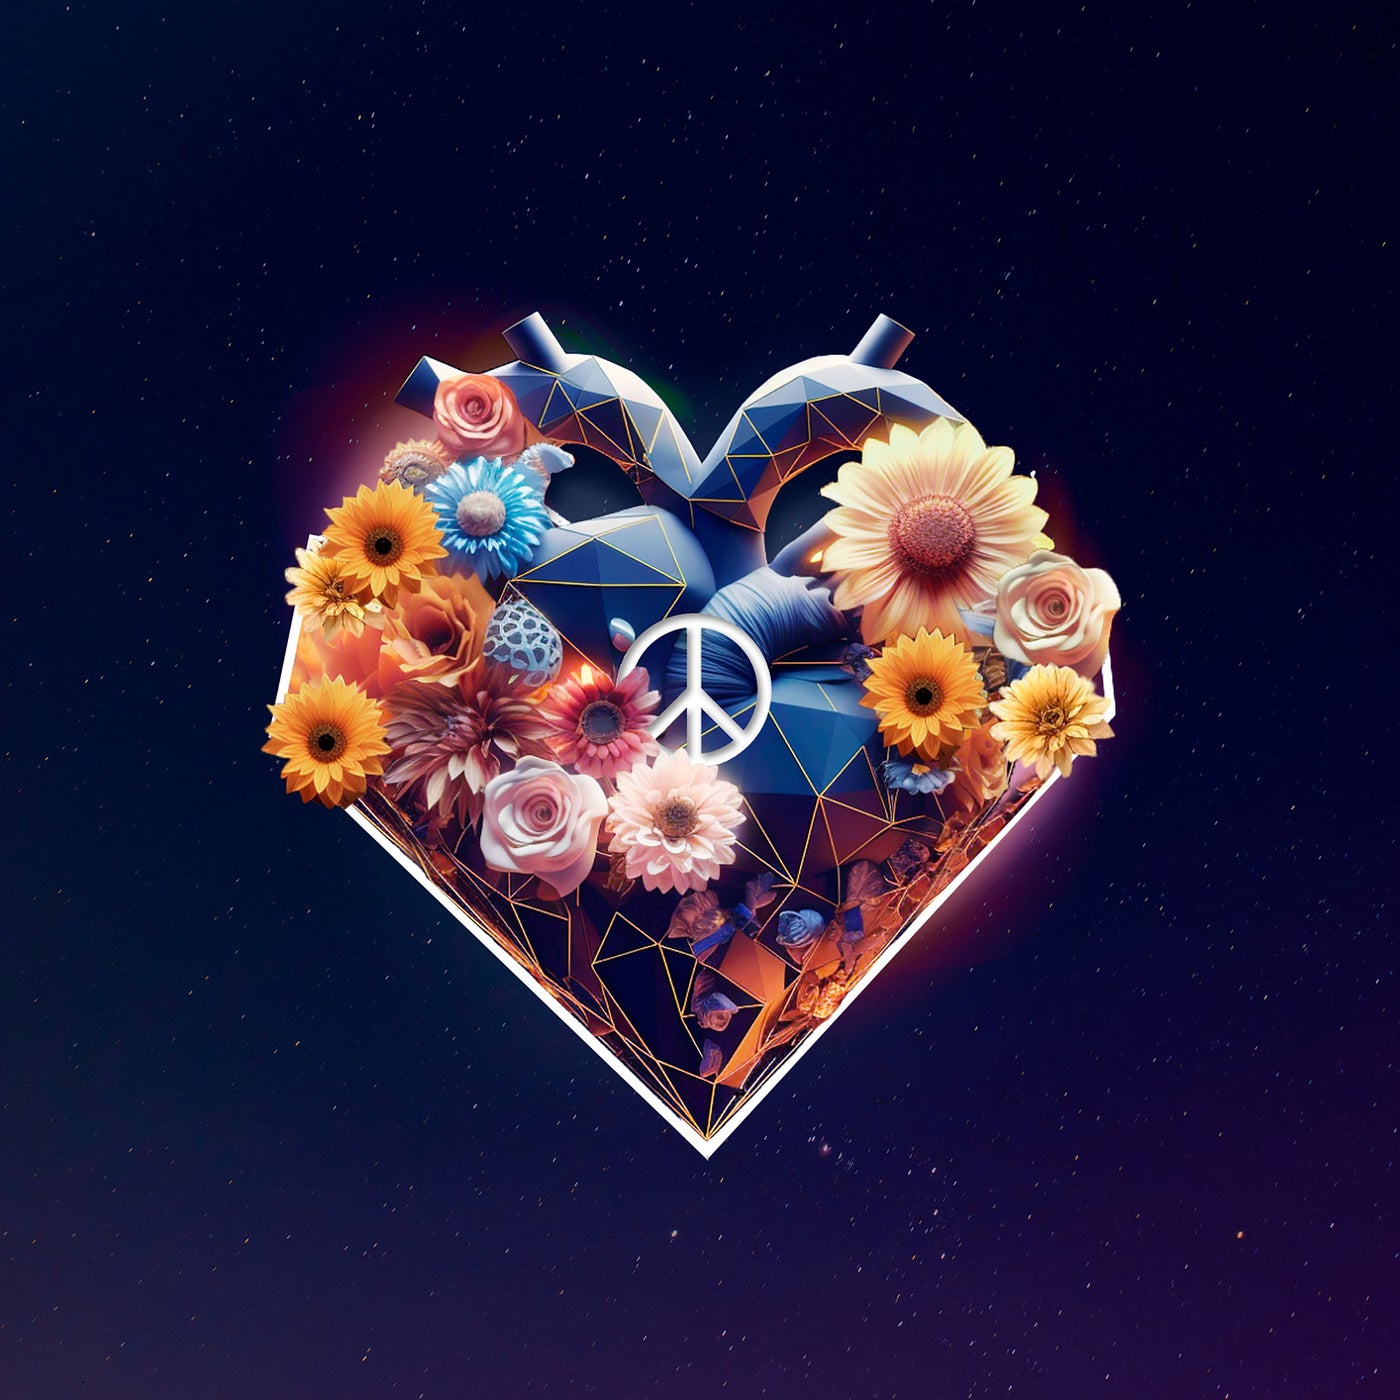 House Music for Peace and Love